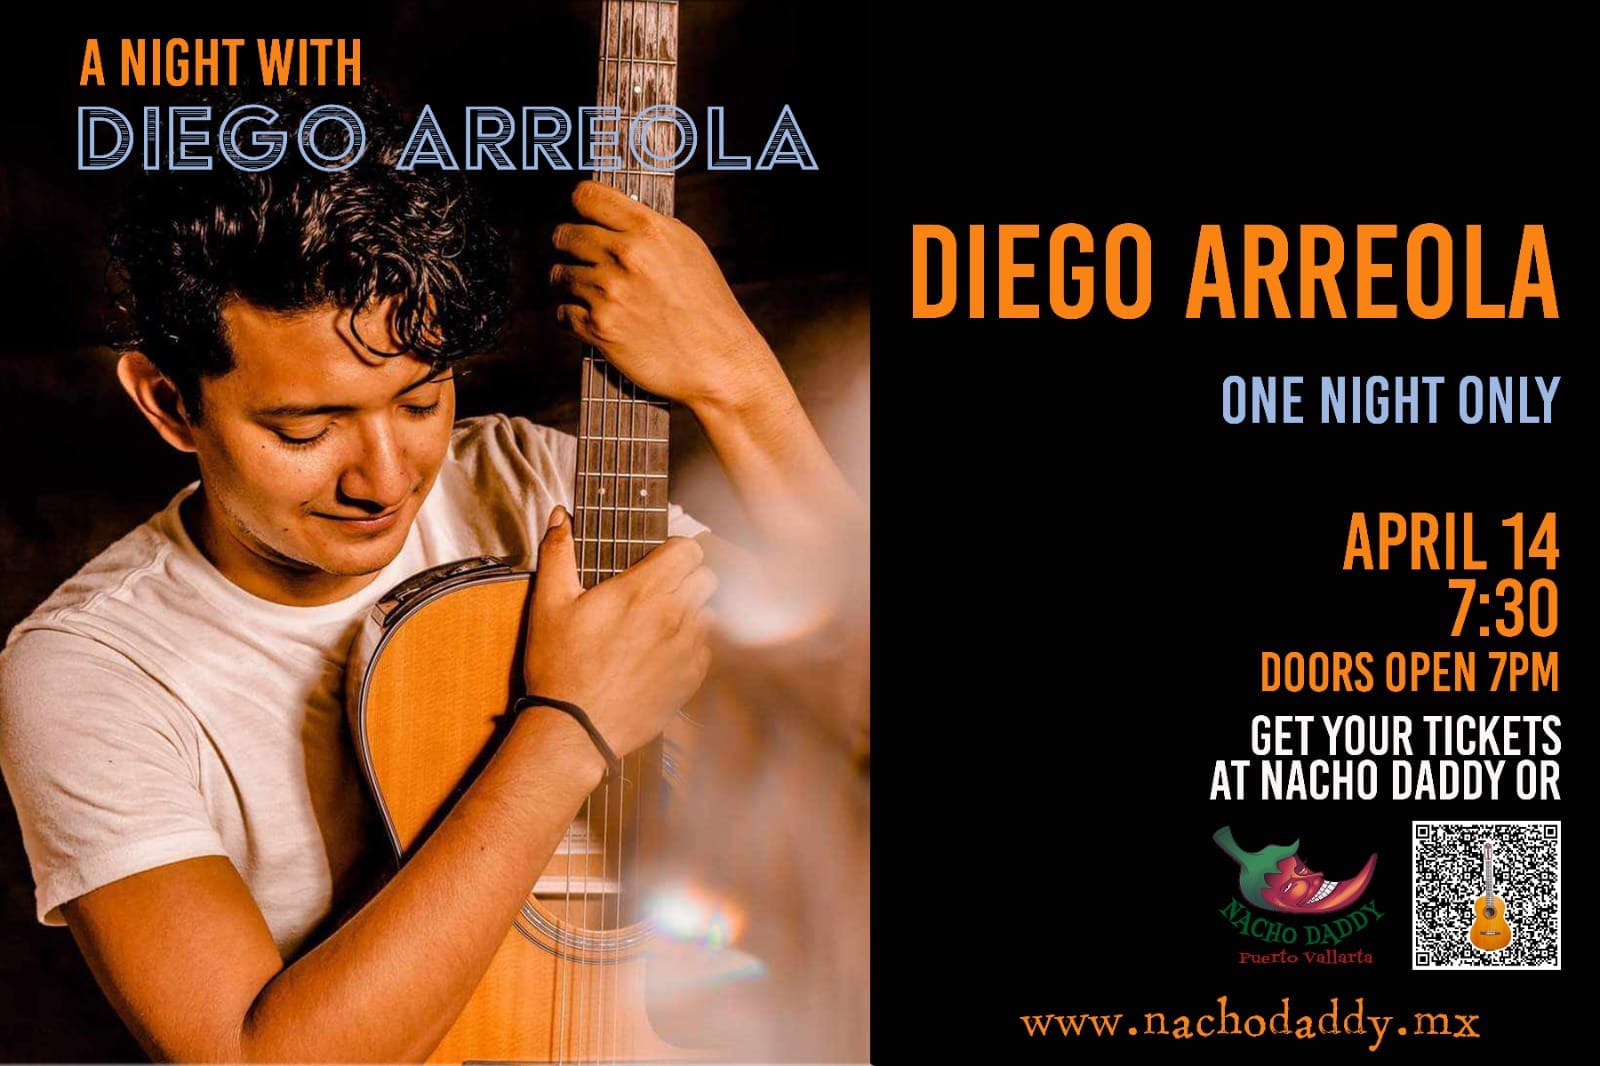 A Night with Diego Arreola